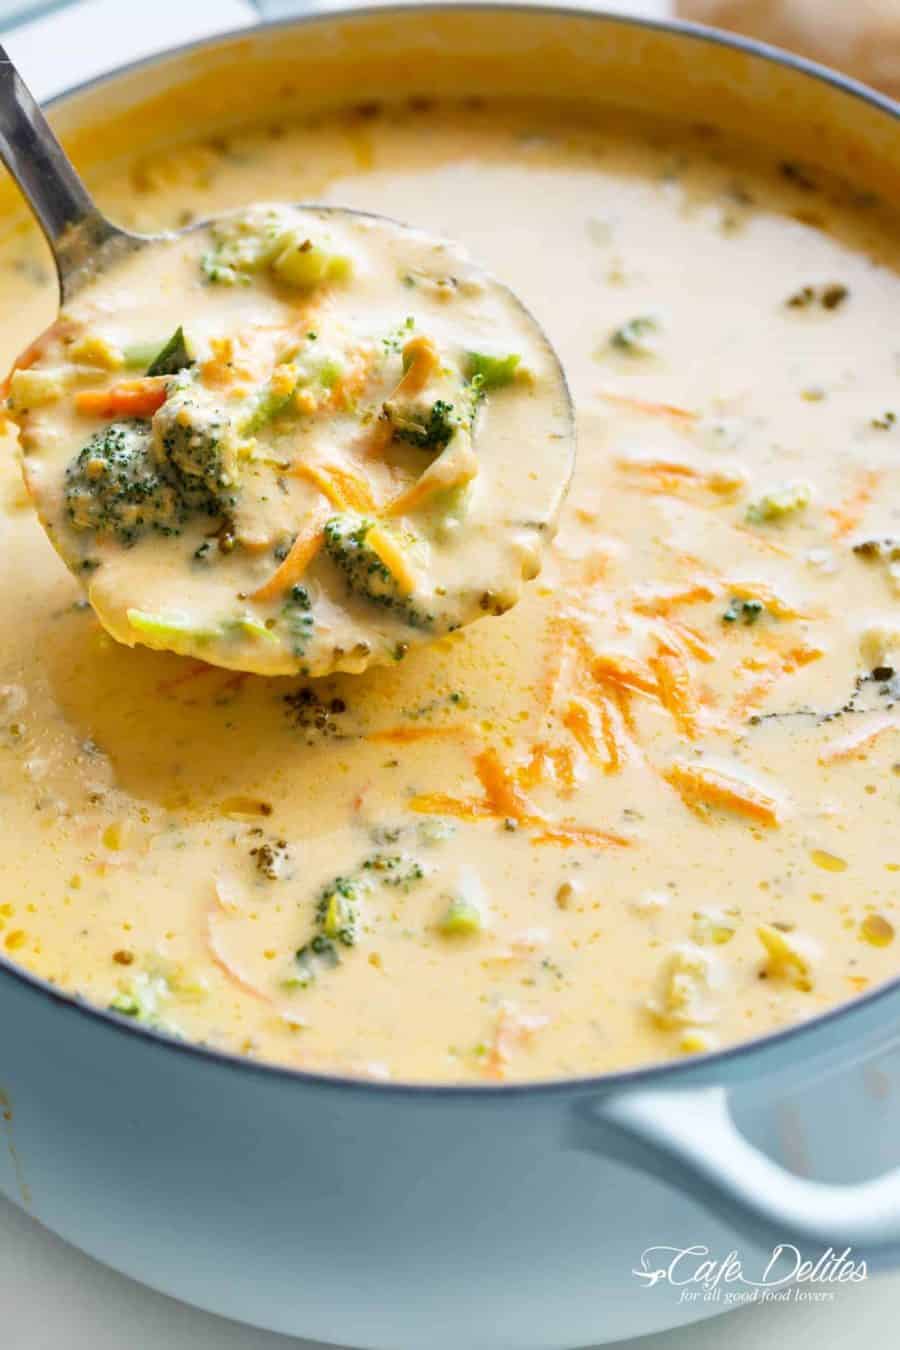 Cream Of Broccoli Soup With Cheese - Homecare24